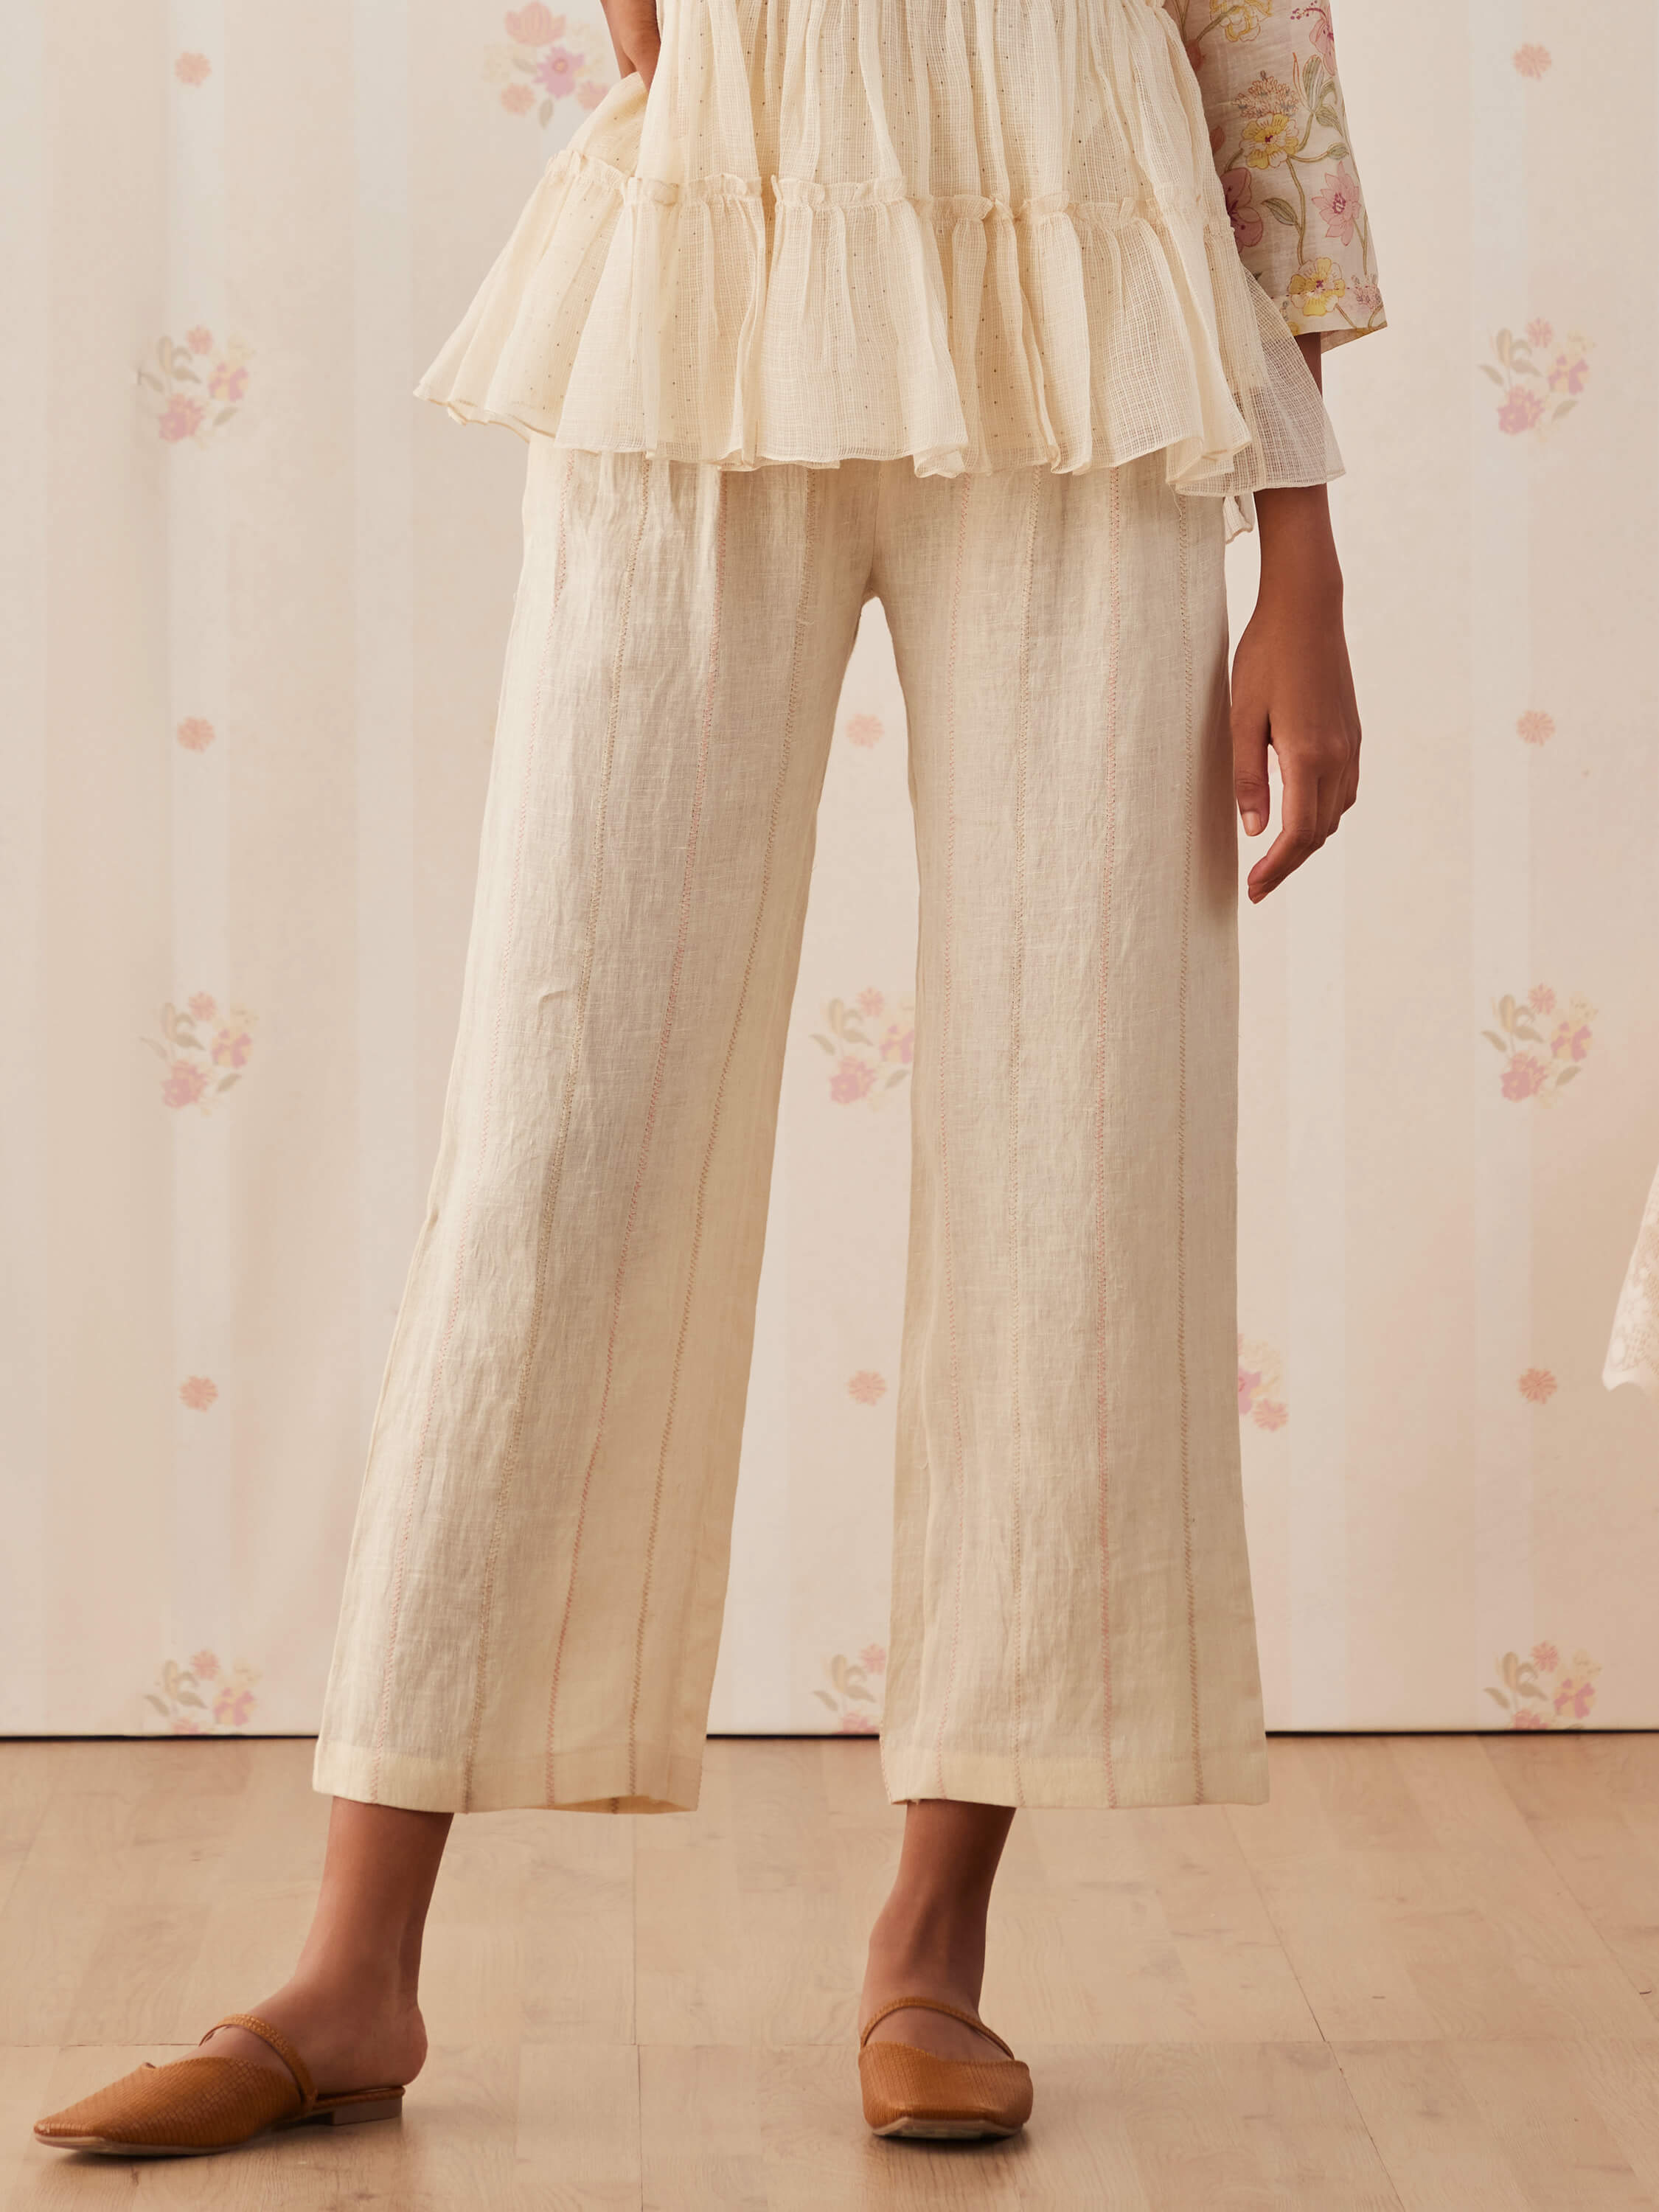 Woman in cream ruffled top and linen pants with brown flats.